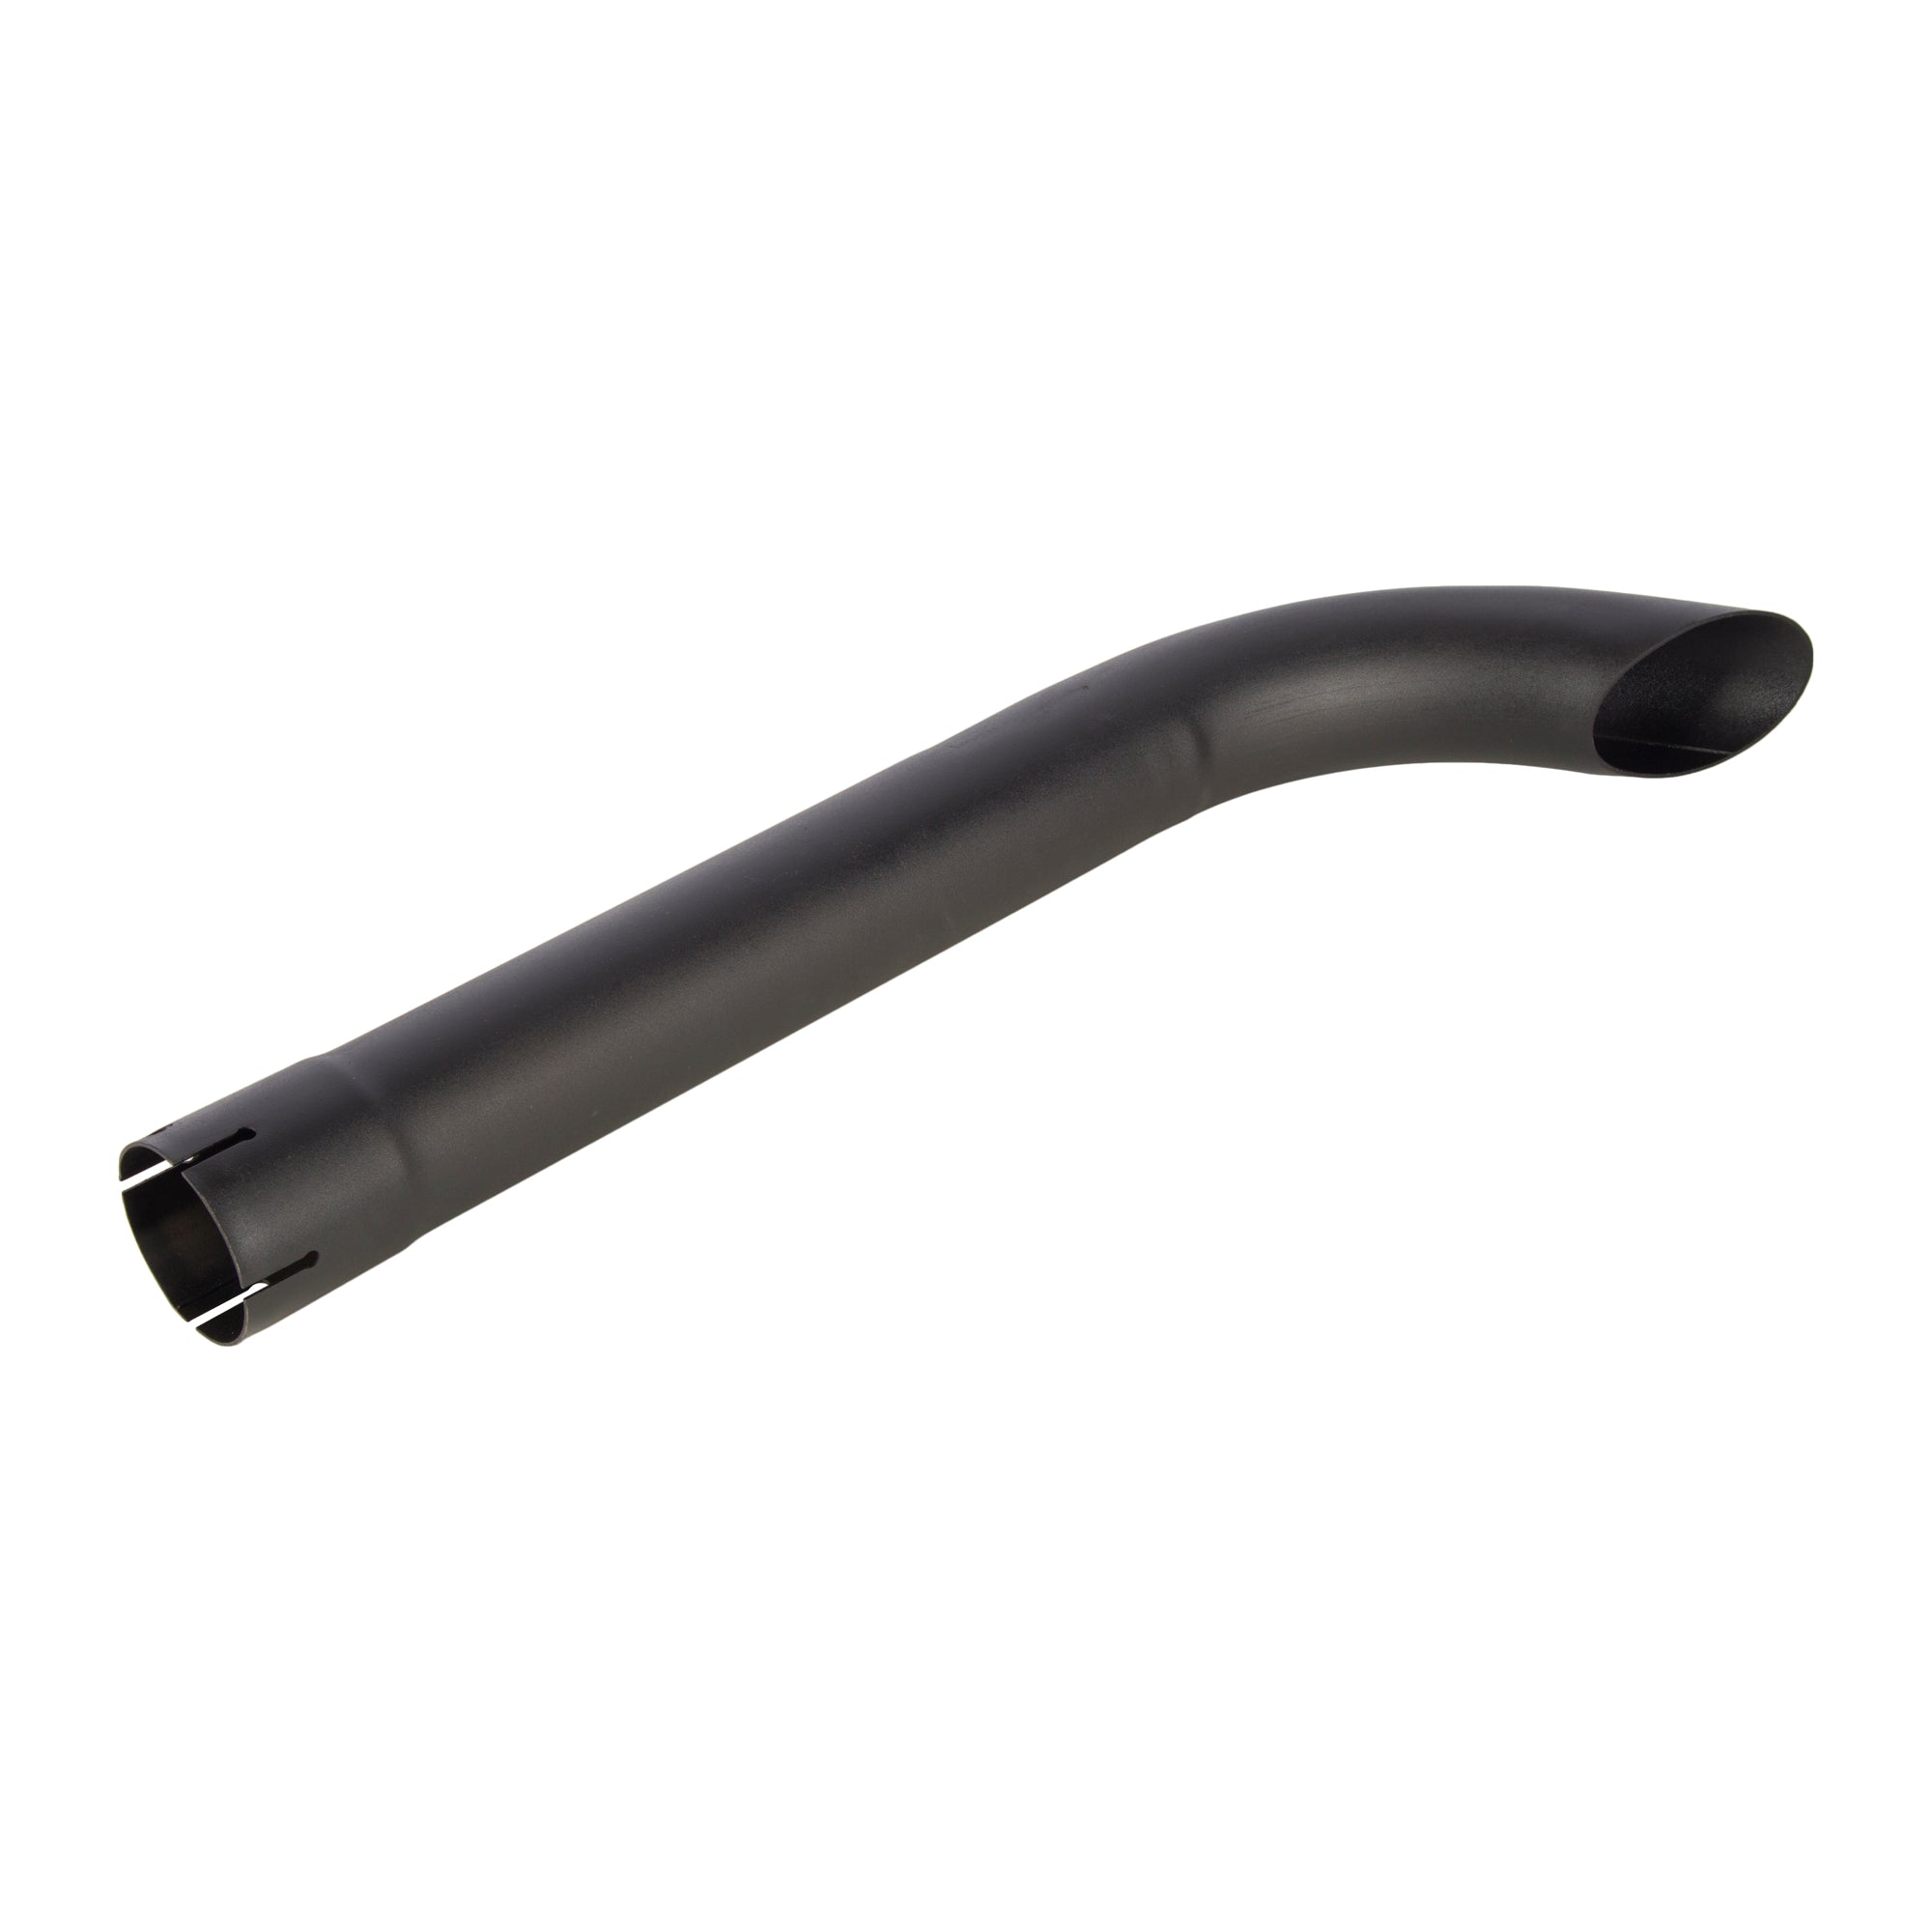 Exhaust Stack Pipe   2-1/2" x 24" Curved Black